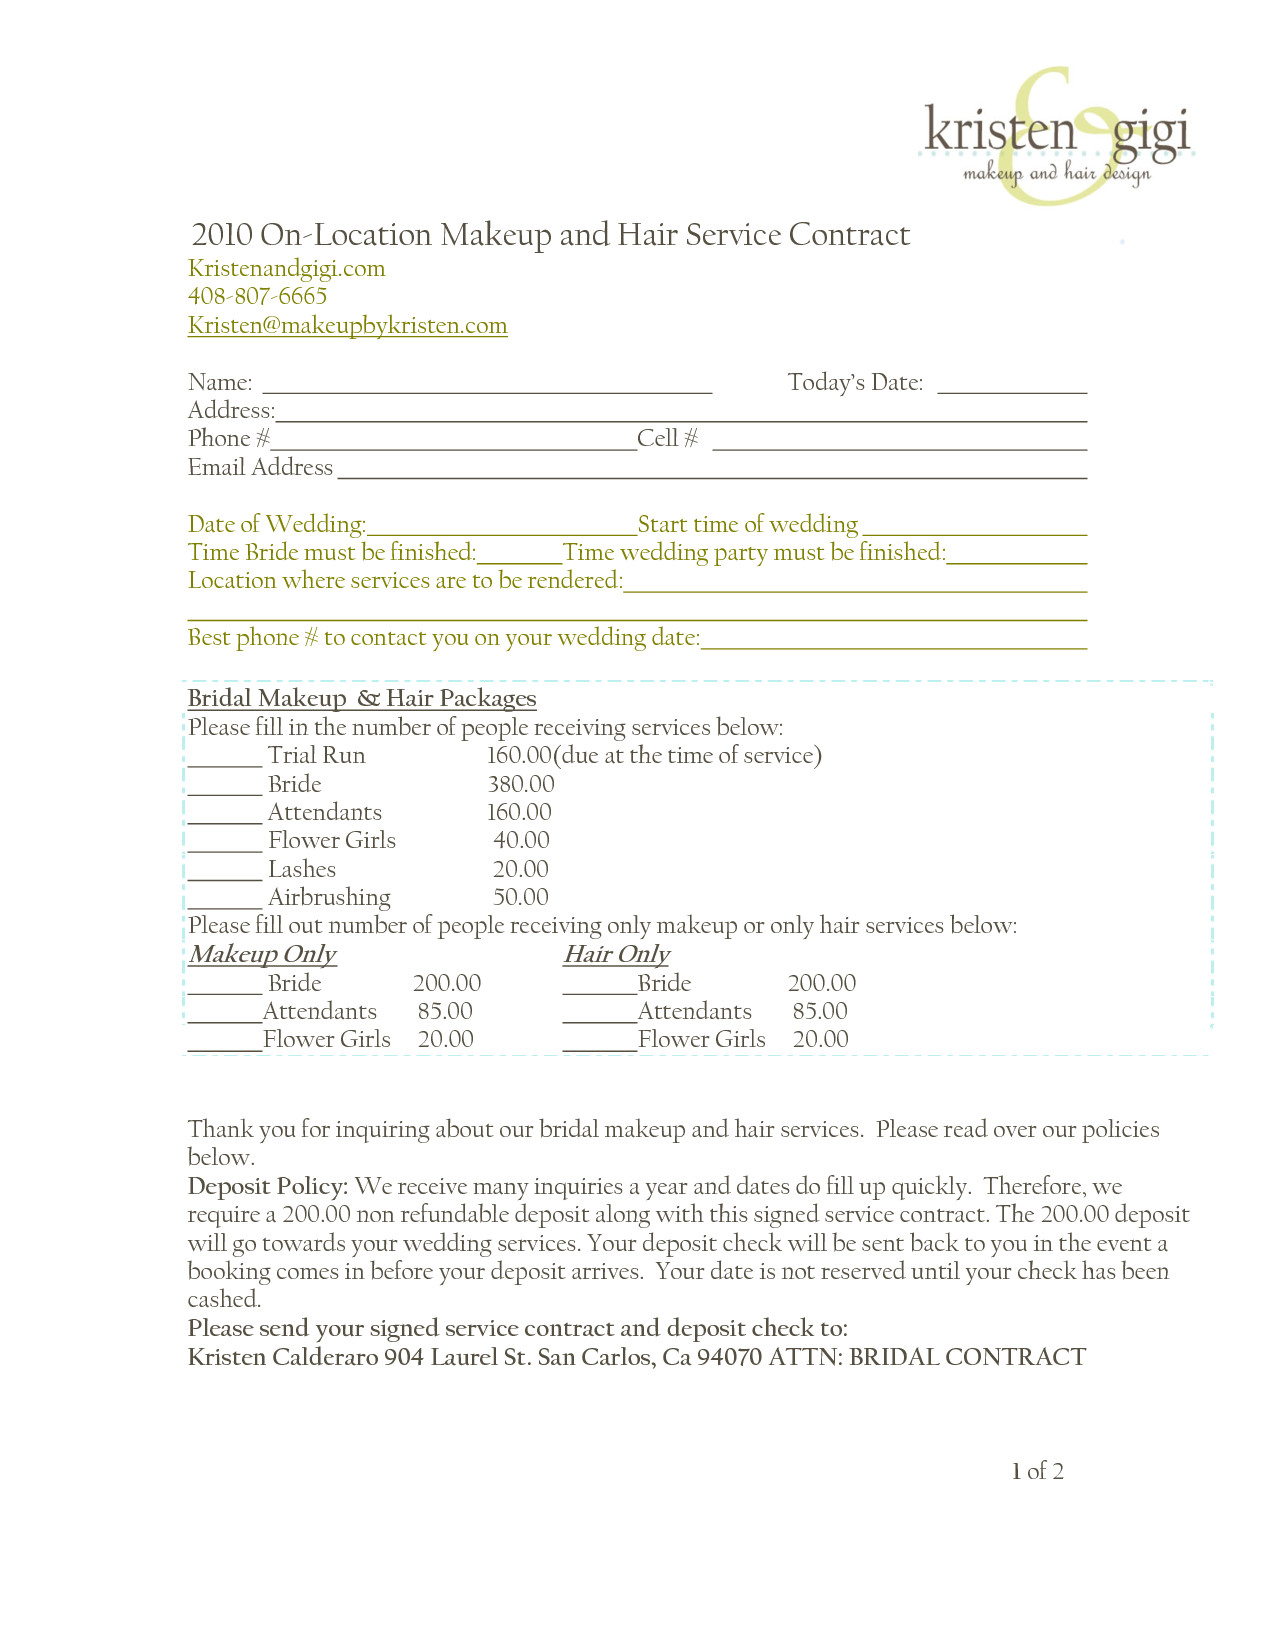 Freelance Makeup Artist Contract Template Bridalhaircotract